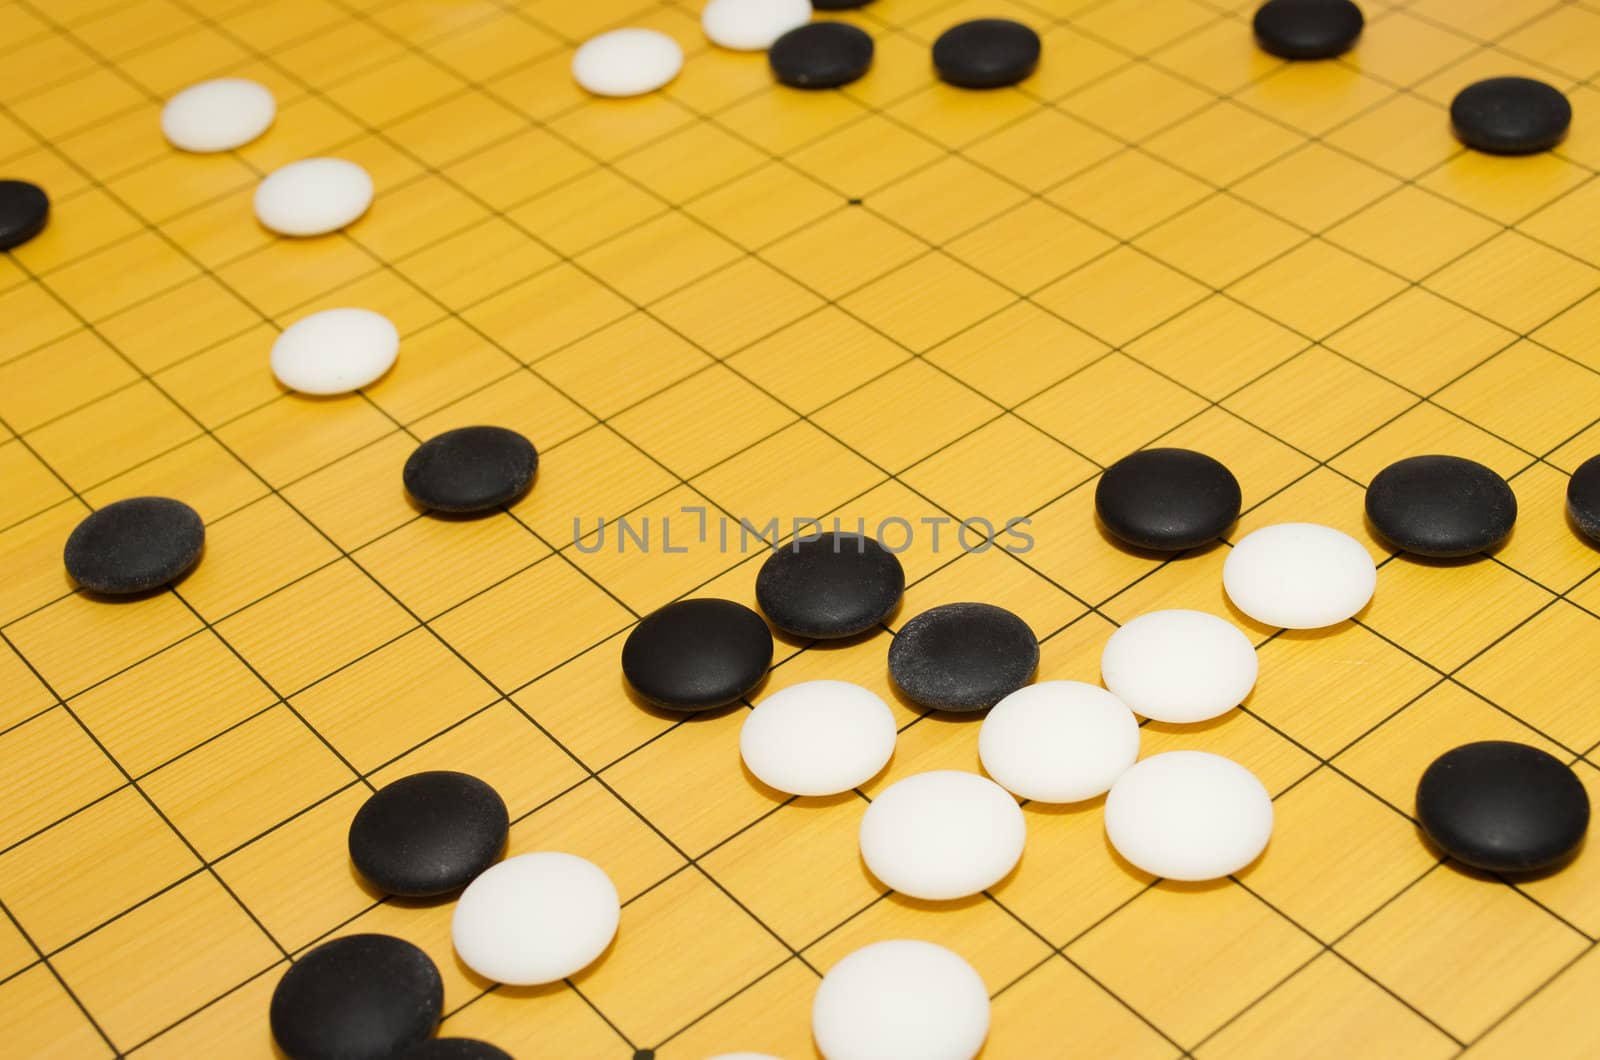 A scene from a game of go. Selective focus.